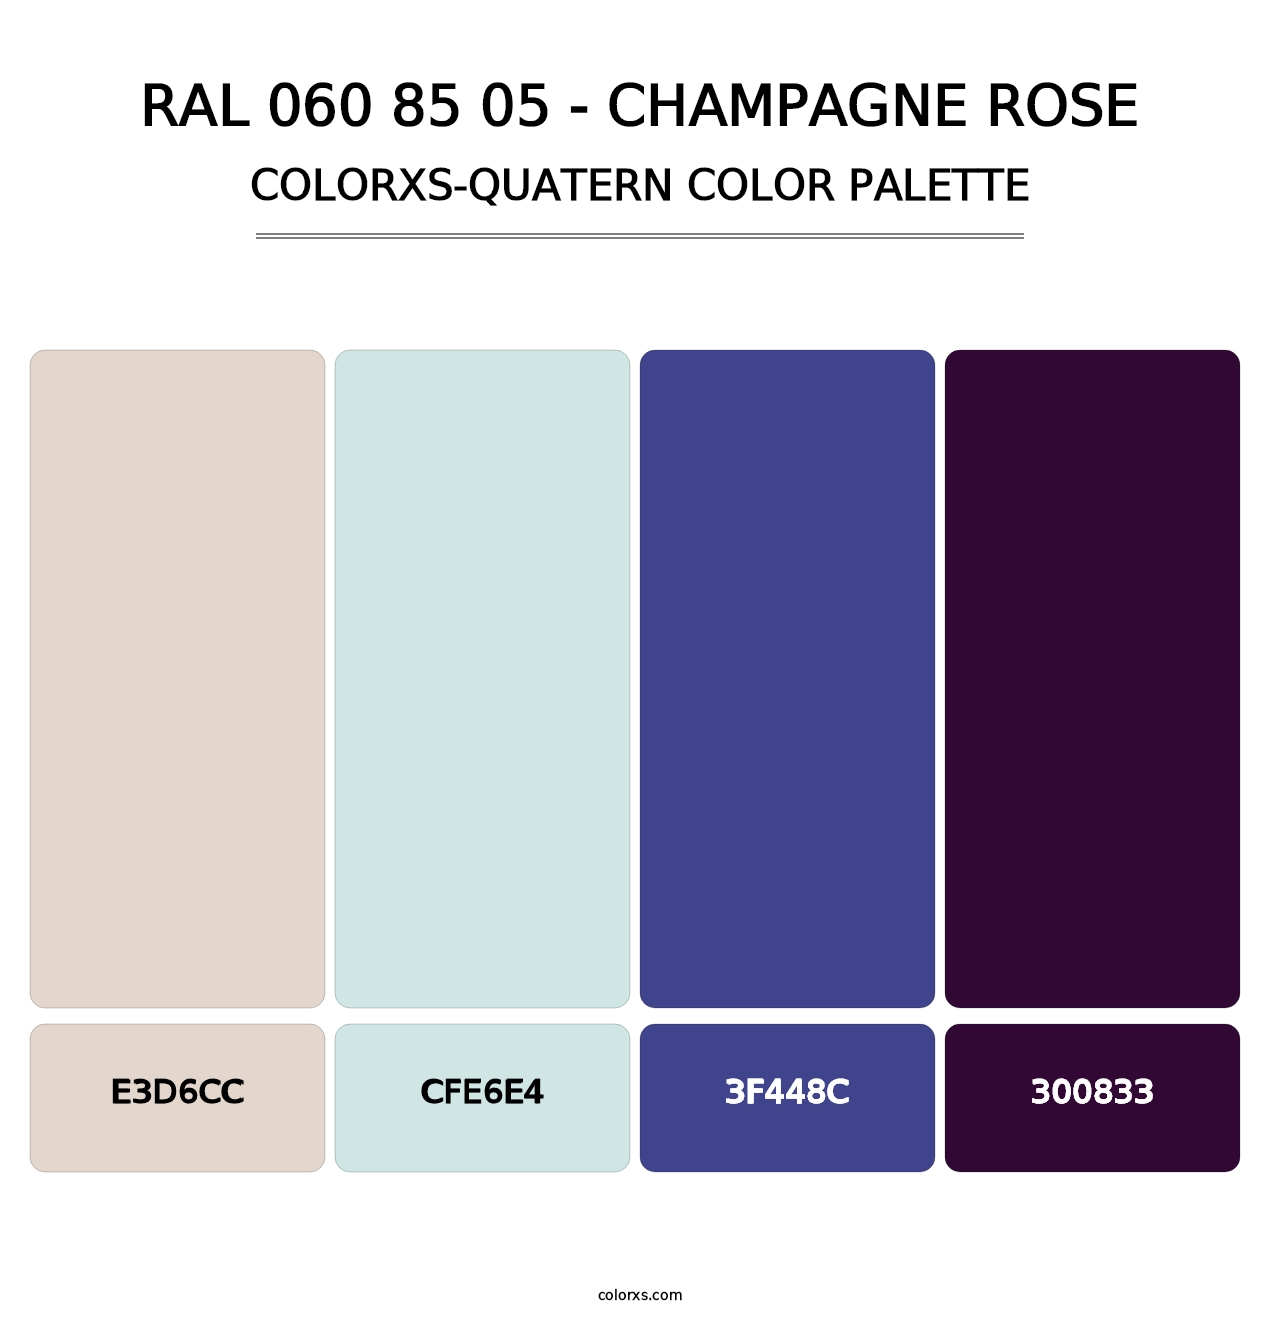 RAL 060 85 05 - Champagne Rose - Colorxs Quatern Palette